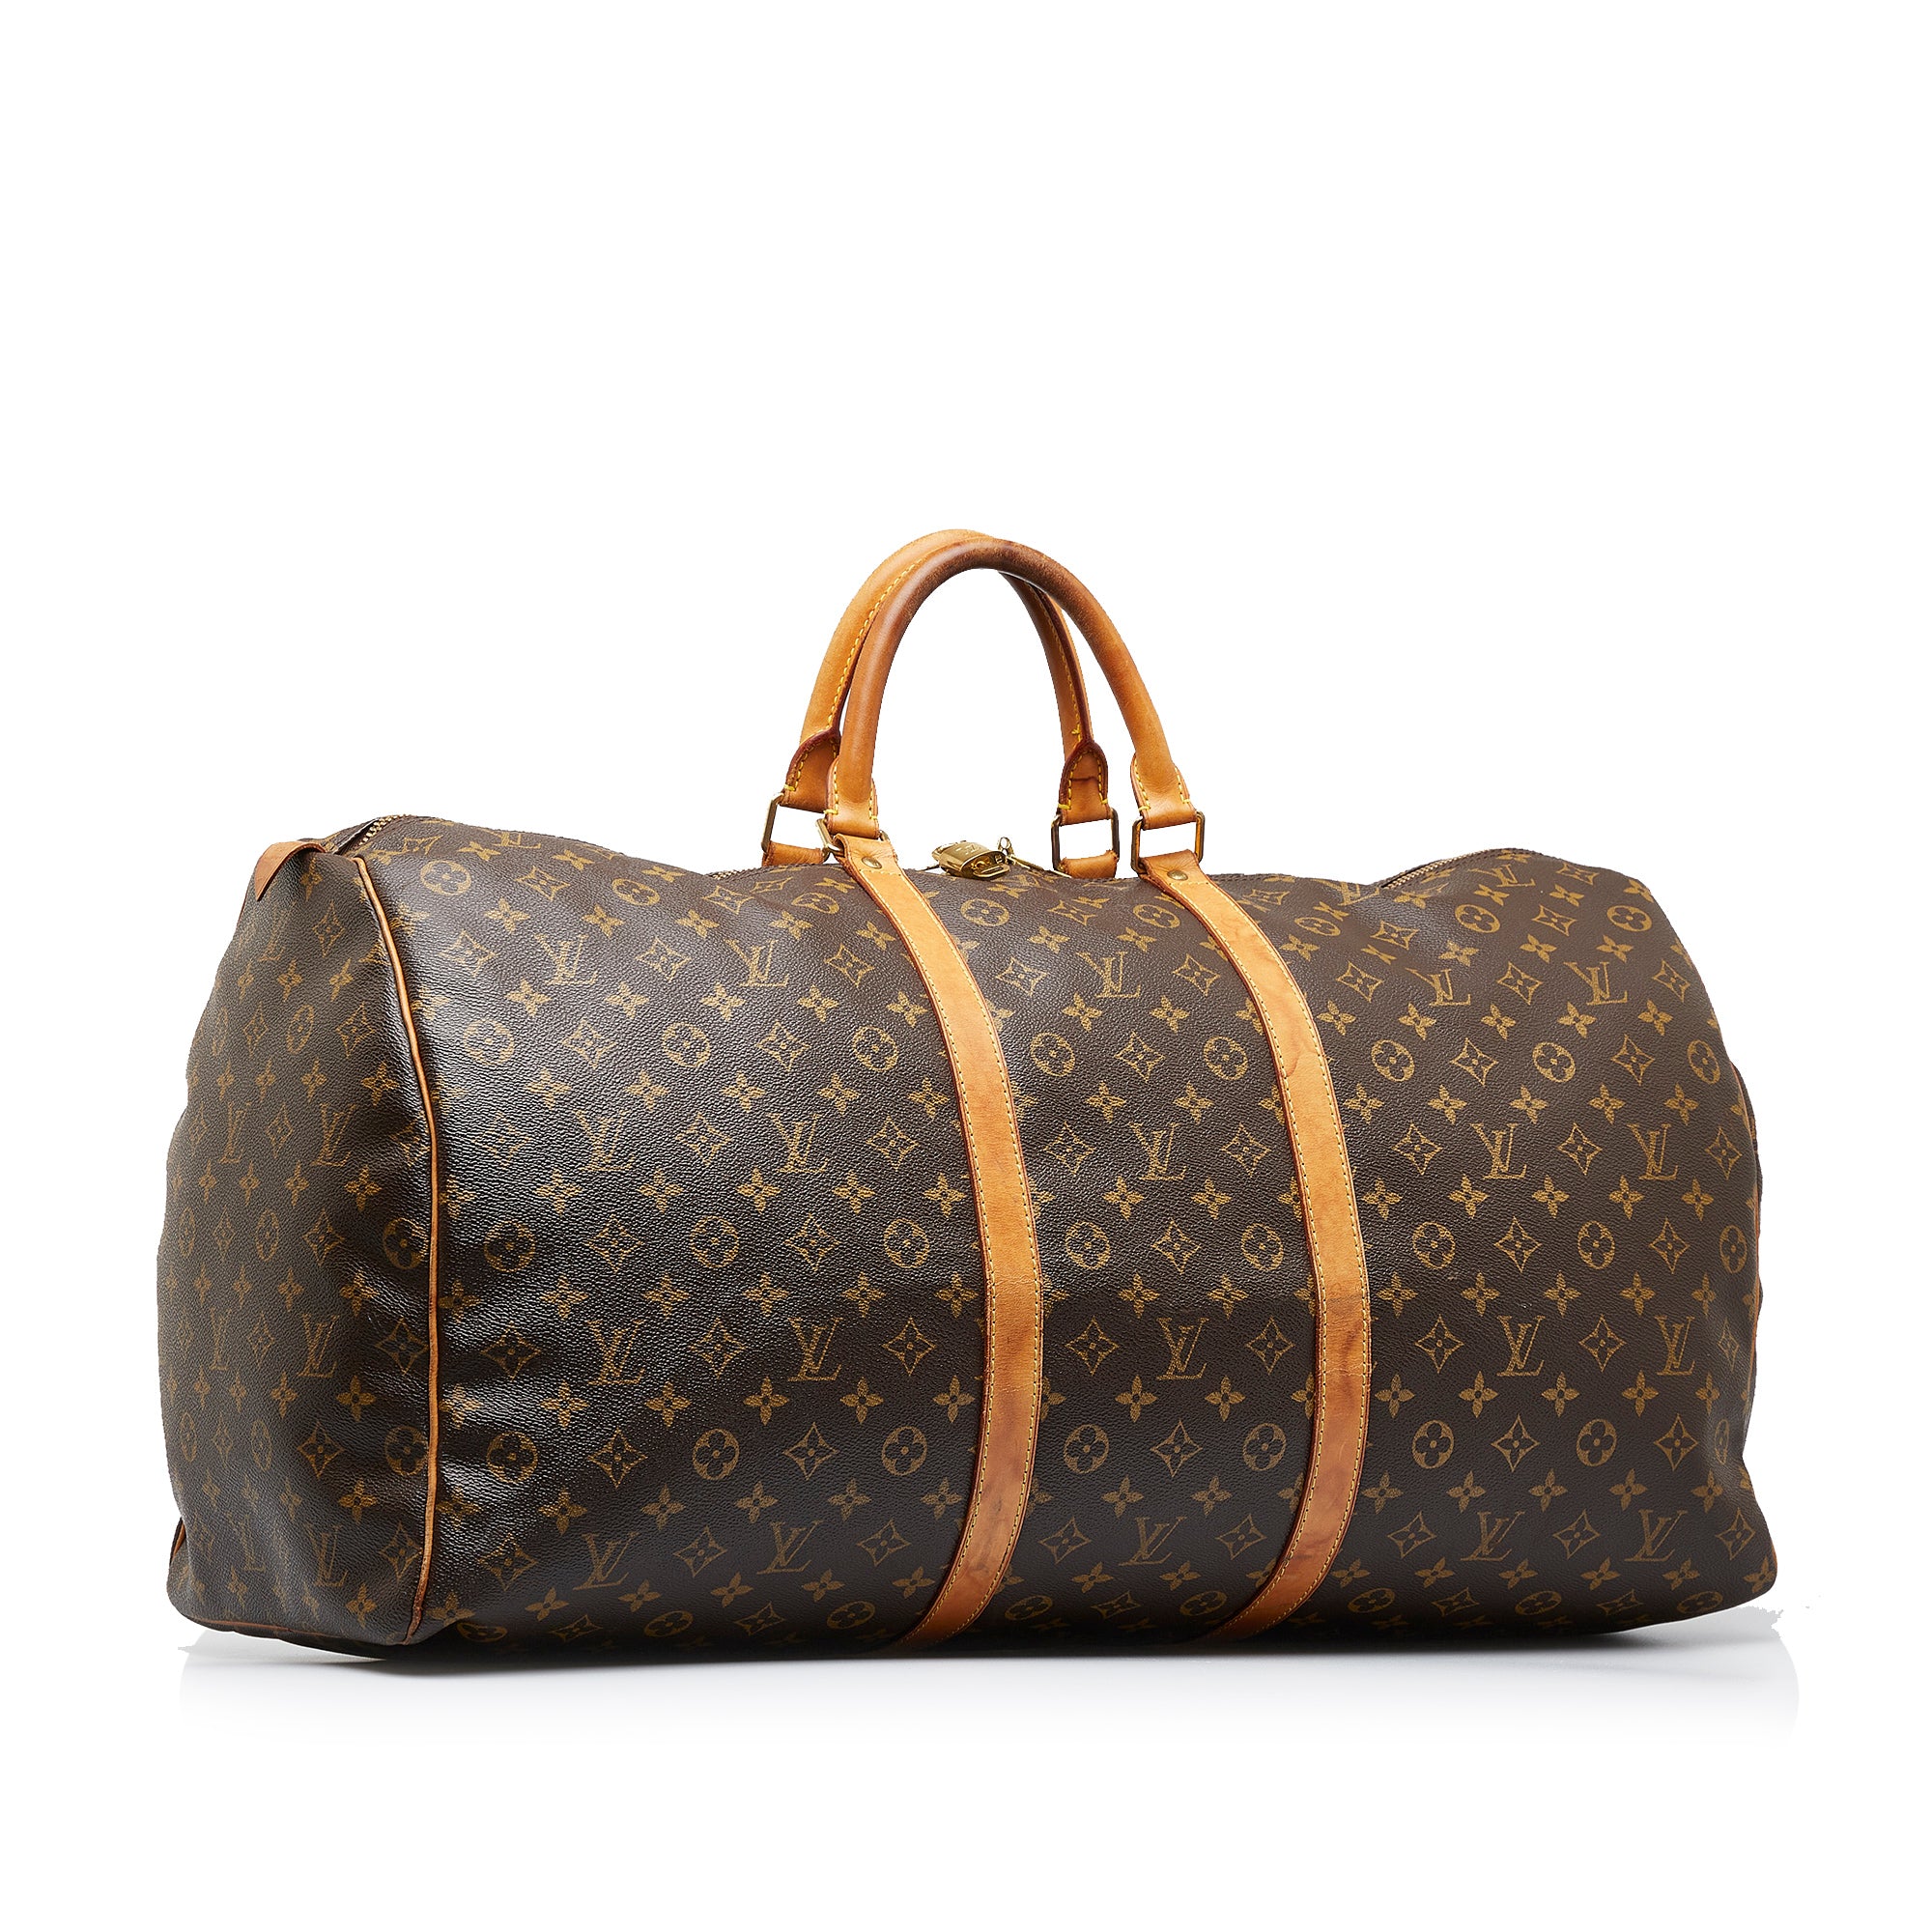 Louis Vuitton - VINTAGE - Preowned Keepall 60 Bag in Brown